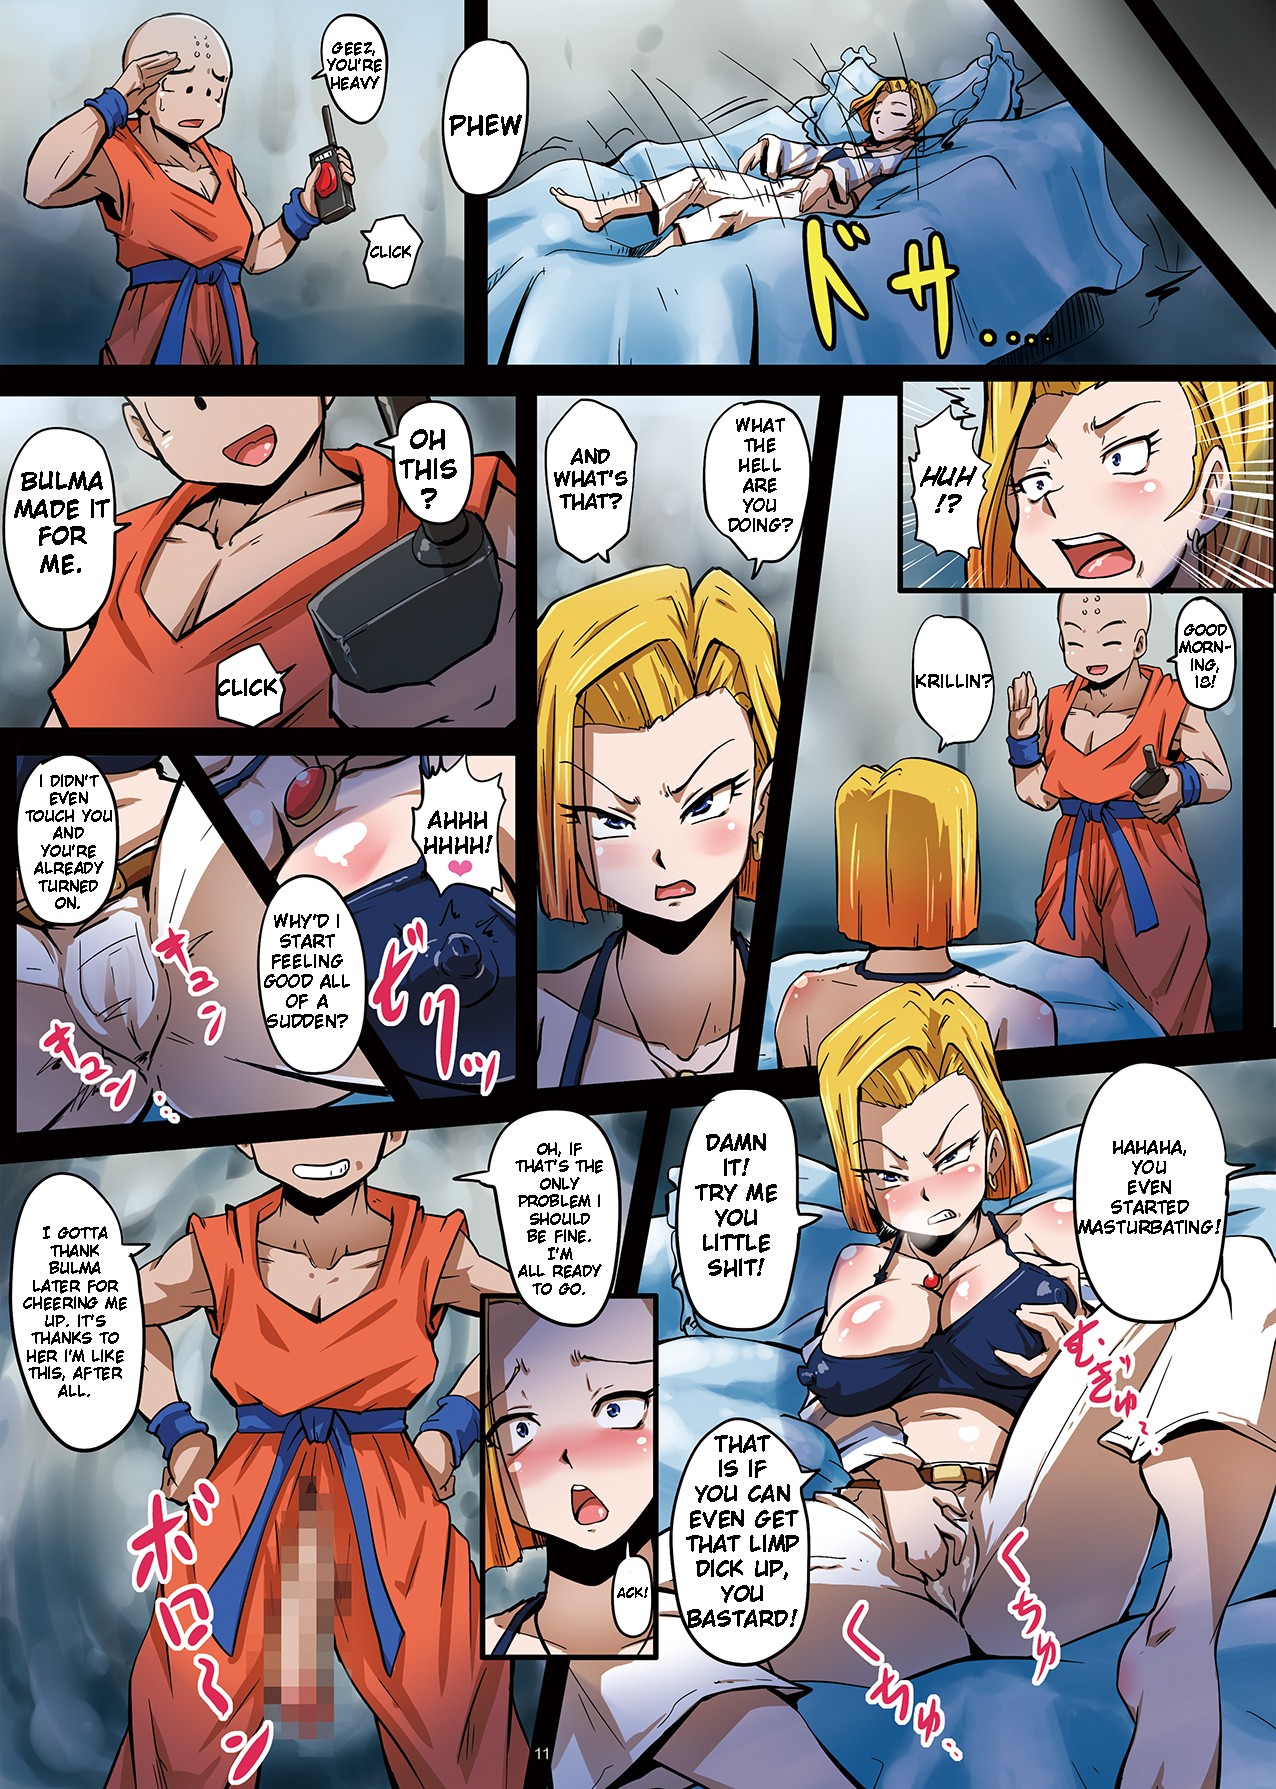 Android 18 Nude Naked Sex - Android 18 Sex Slave | BDSM Fetish